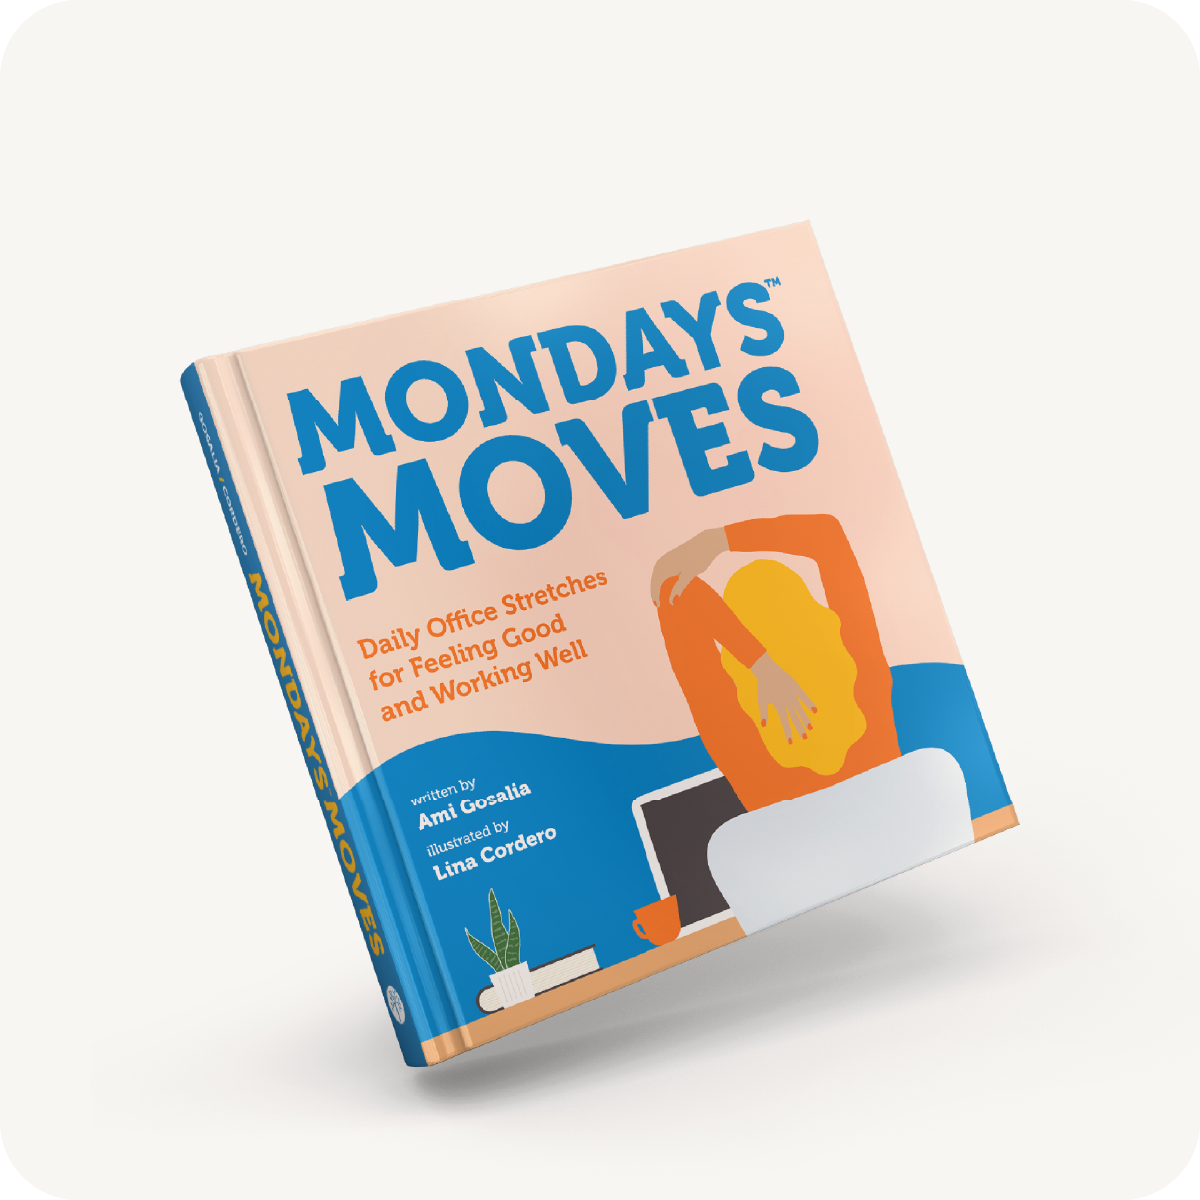 Mondays Moves: Daily Office Stretches for Feeling Good and Working Well by Mondays